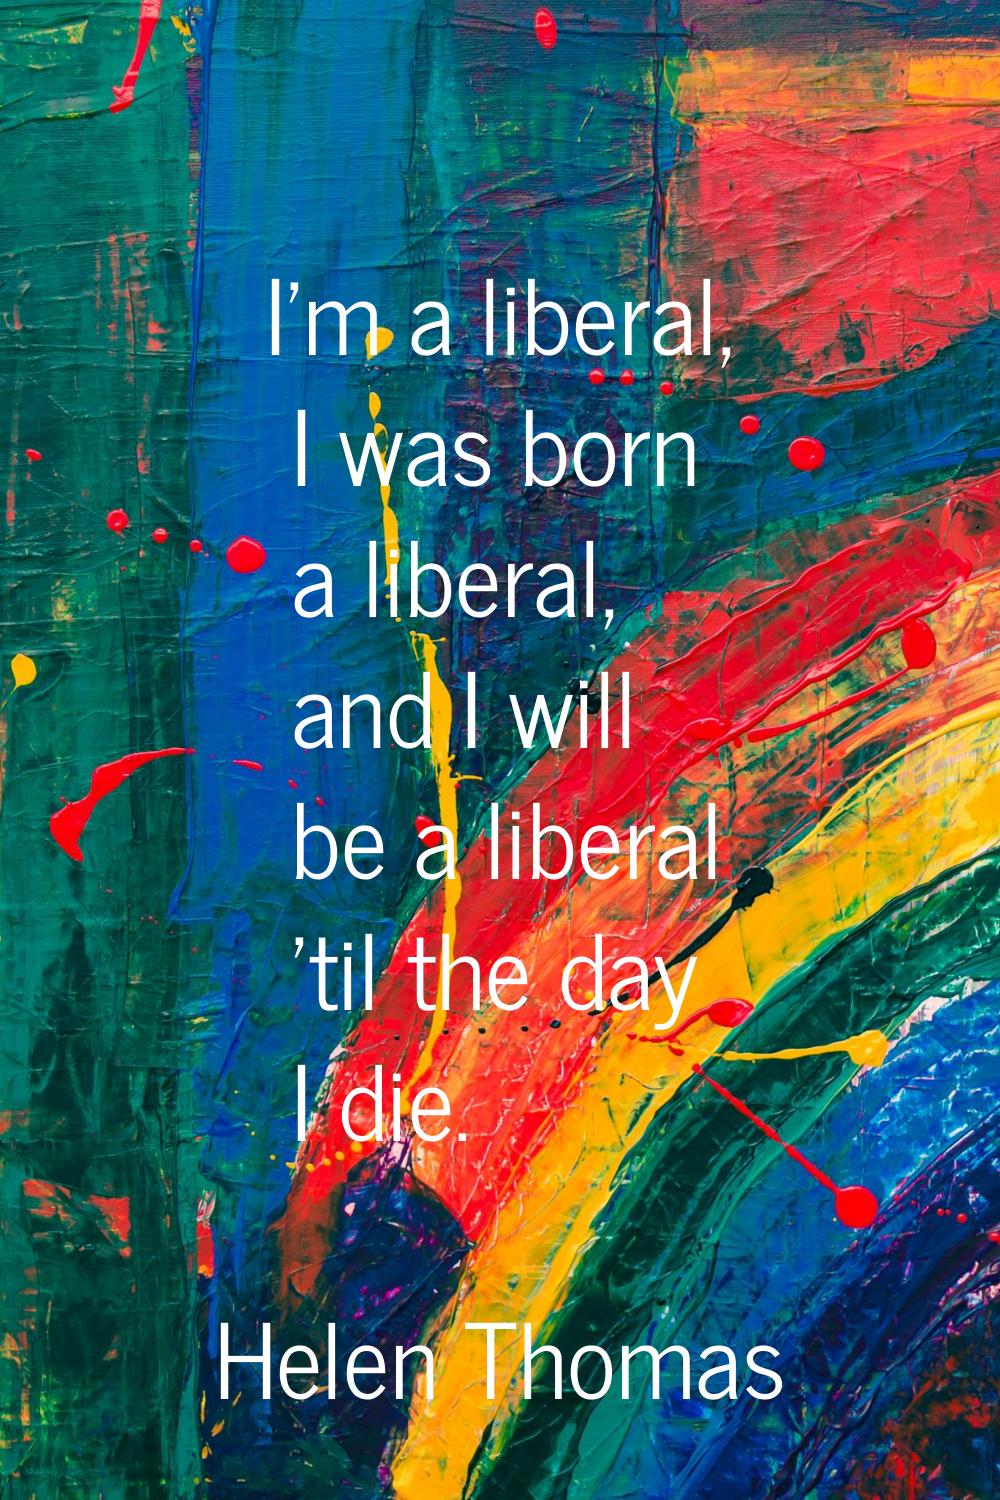 I'm a liberal, I was born a liberal, and I will be a liberal 'til the day I die.